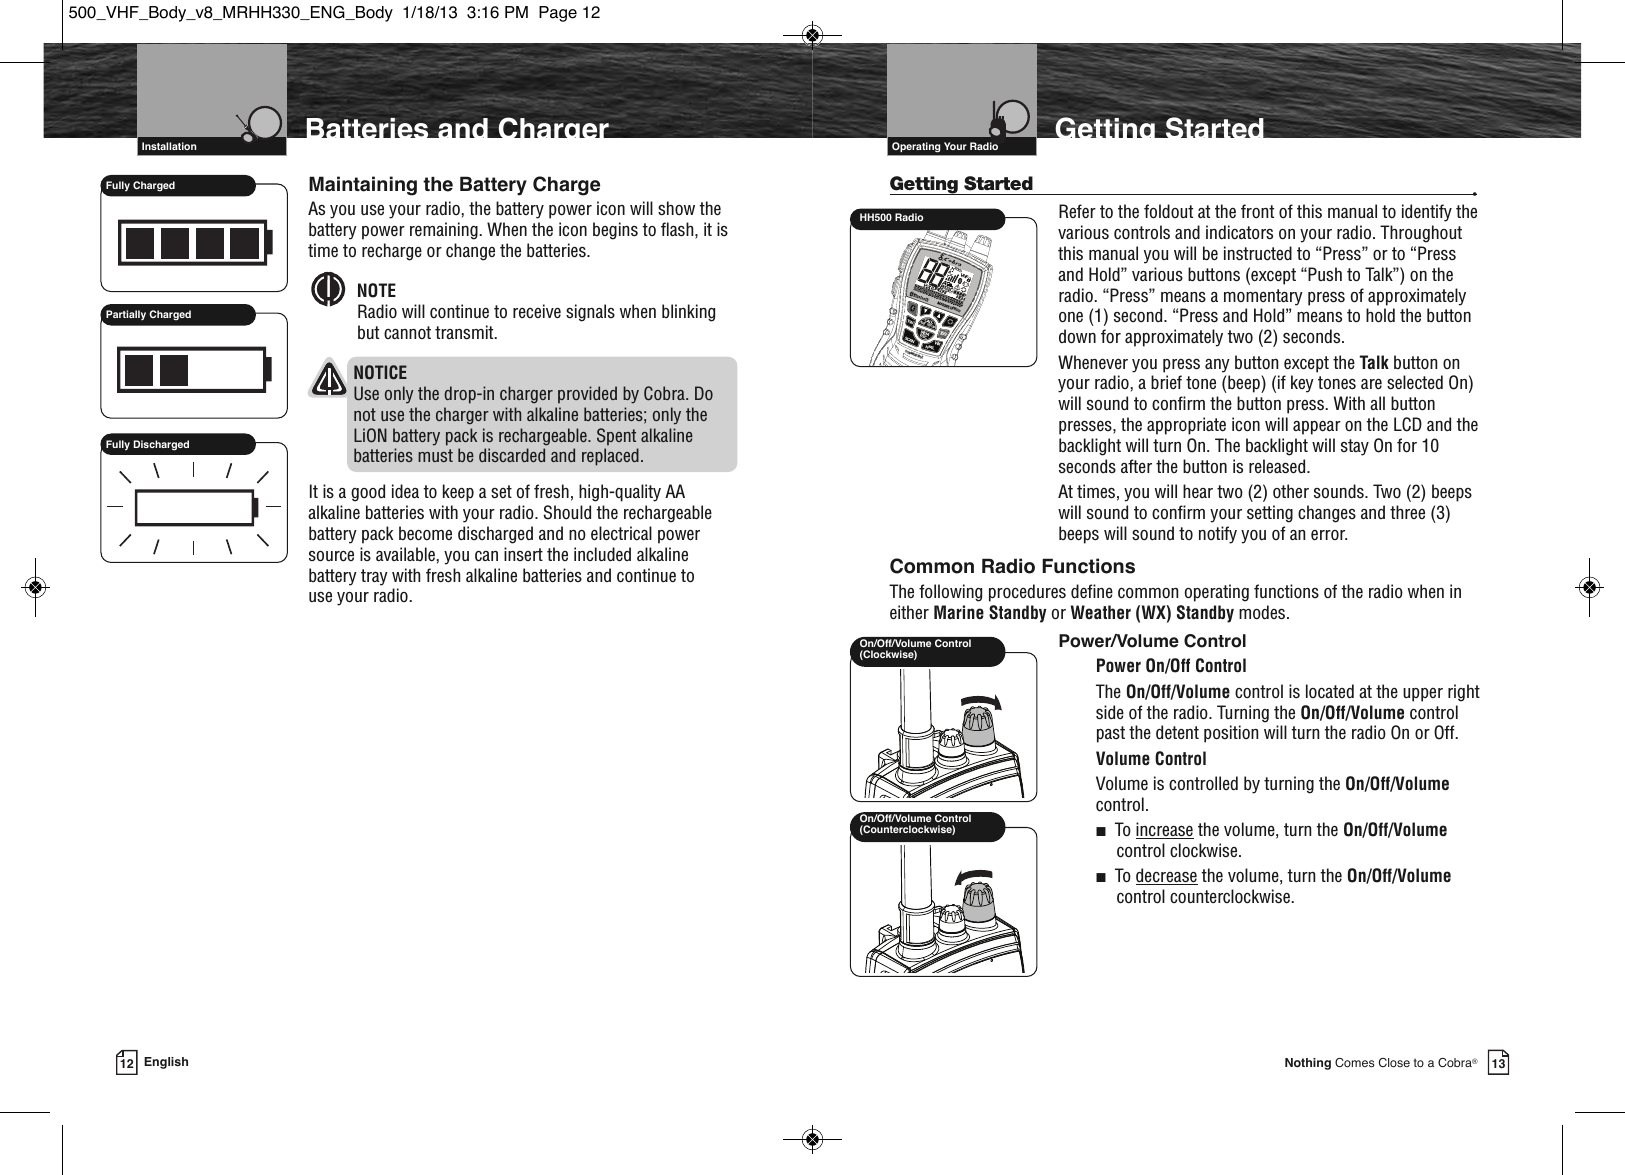 Page 9 of Cobra Electronics MRHH500 BT ACCESSORY IN MARINE RADIO User Manual MRHH330 ENG Body